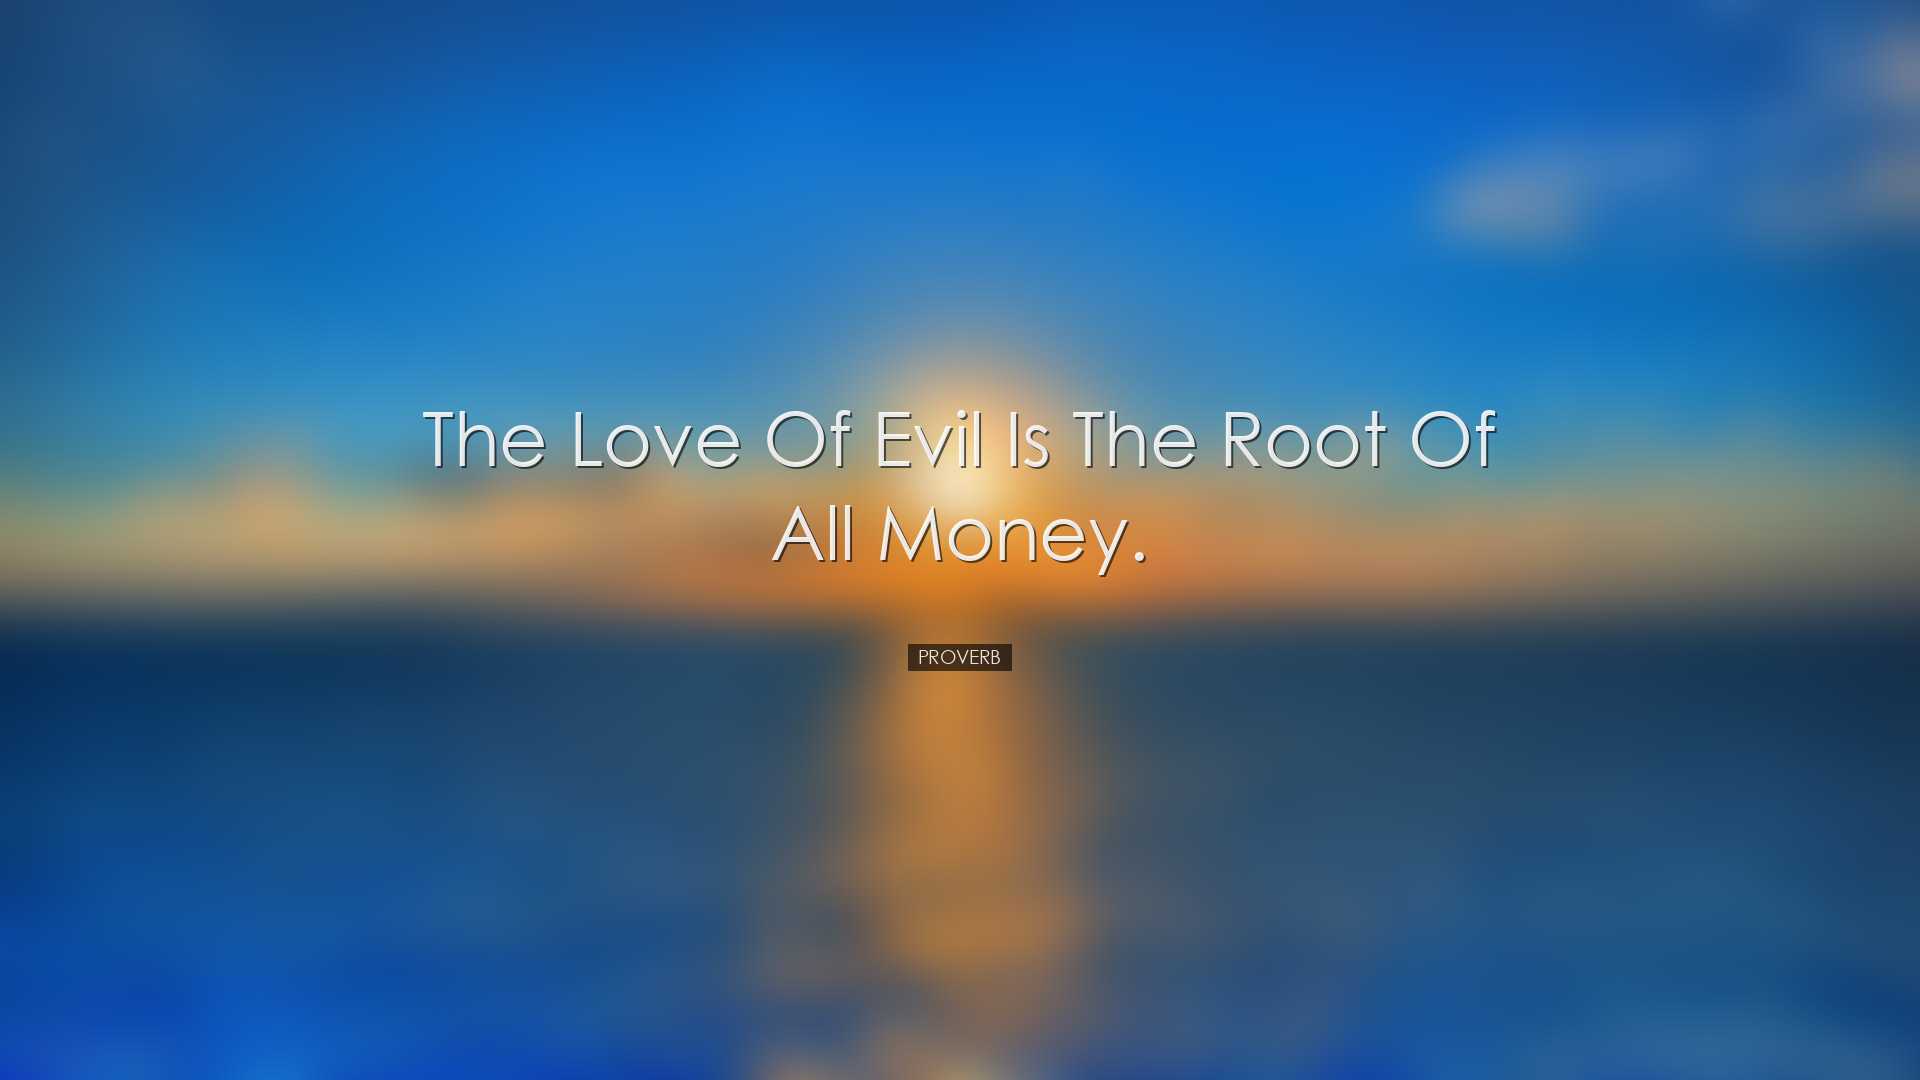 The love of evil is the root of all money. - Proverb